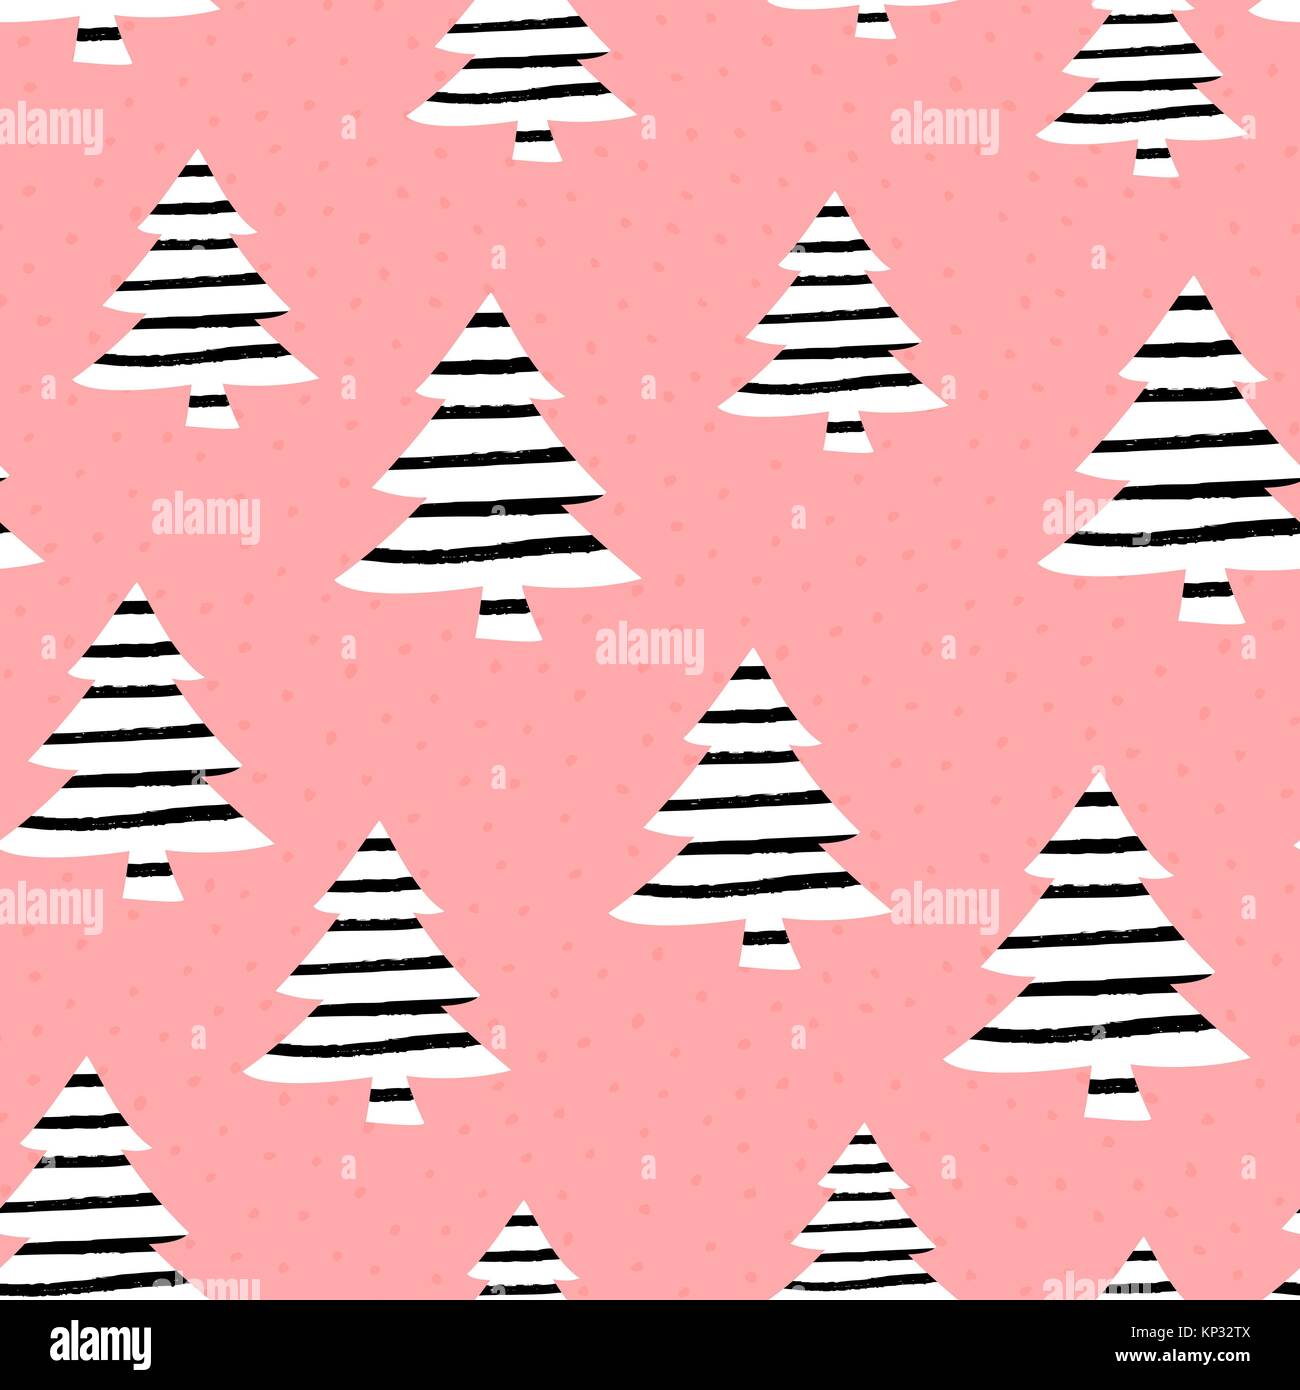 Simple Pink Christmas Wallpaper for PC  Idea Wallpapers  iPhone WallpapersColor  Schemes